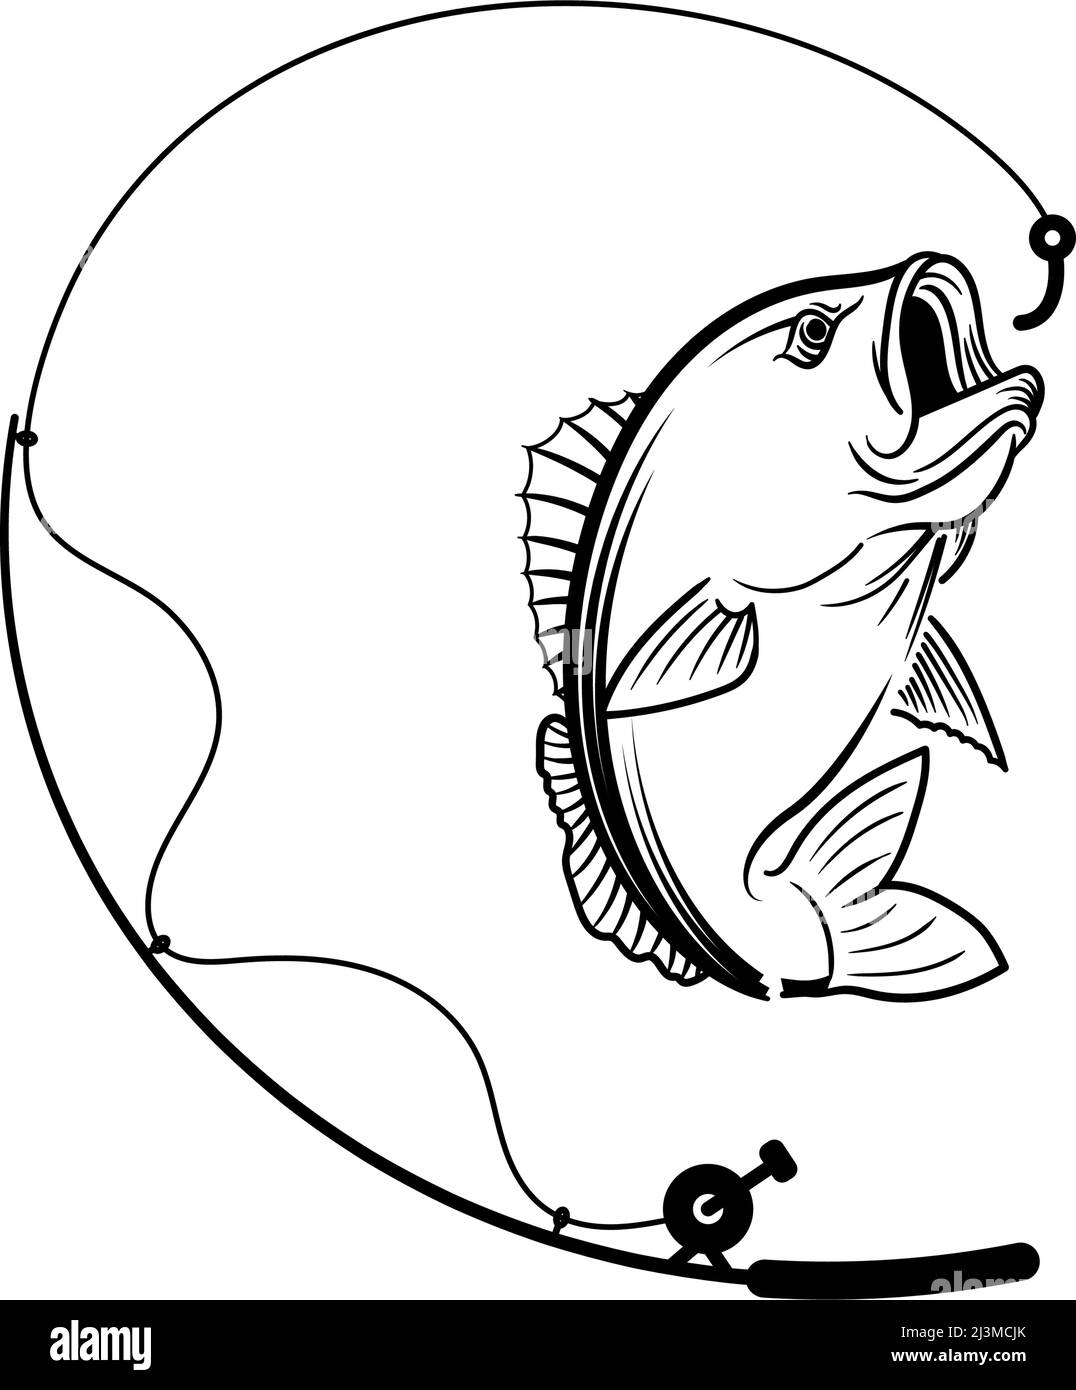 detailed illustration of a fish line art on white Stock Photo - Alamy